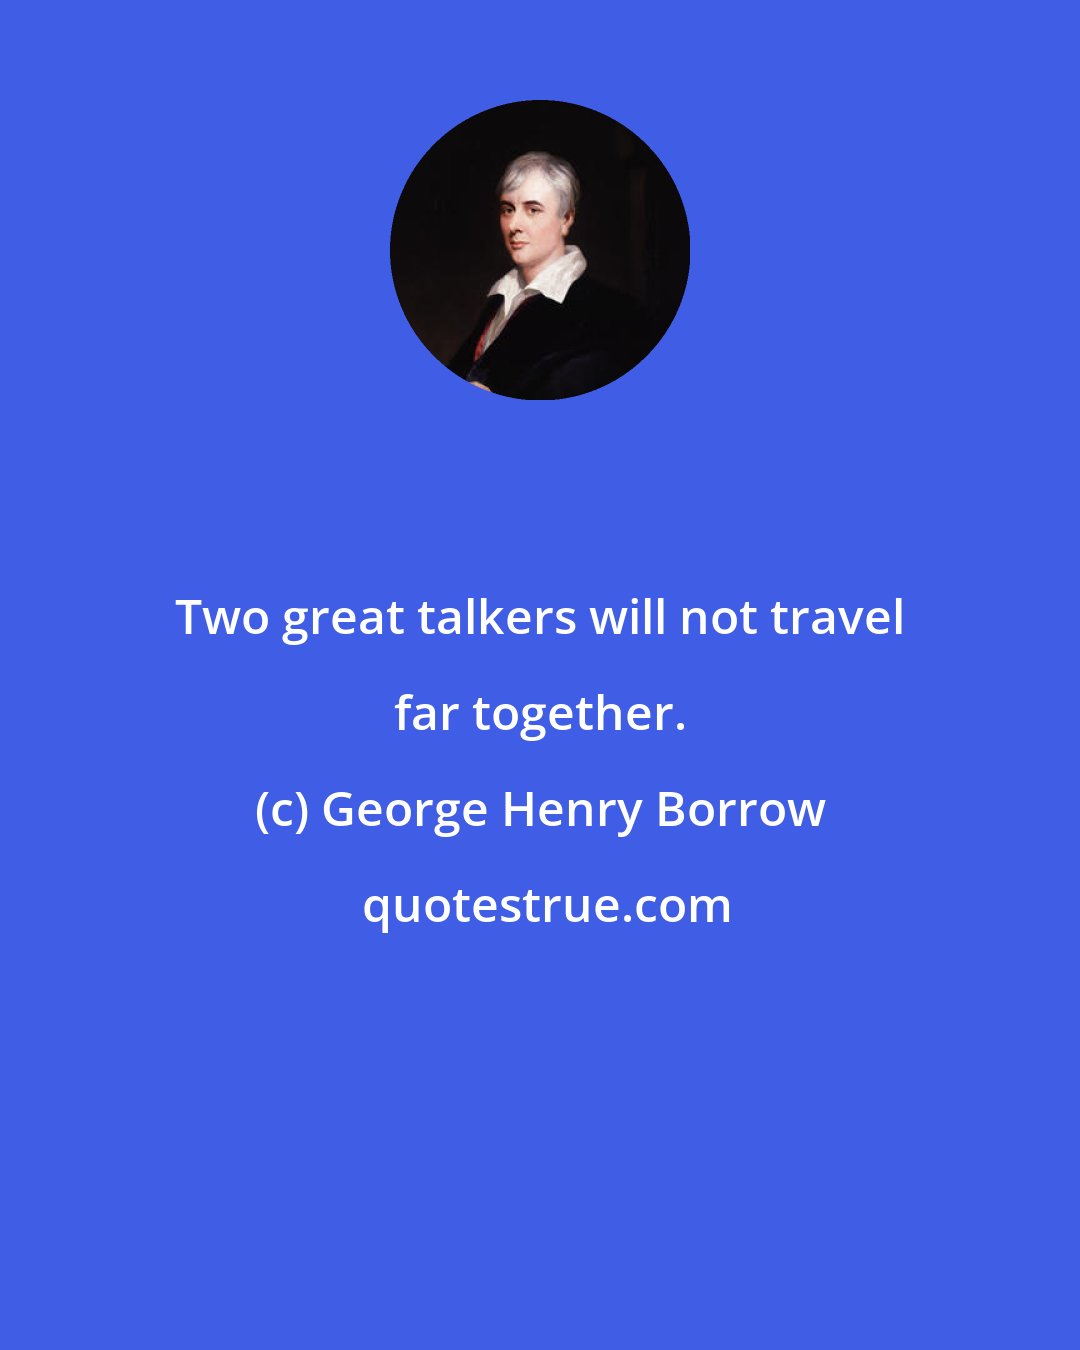 George Henry Borrow: Two great talkers will not travel far together.